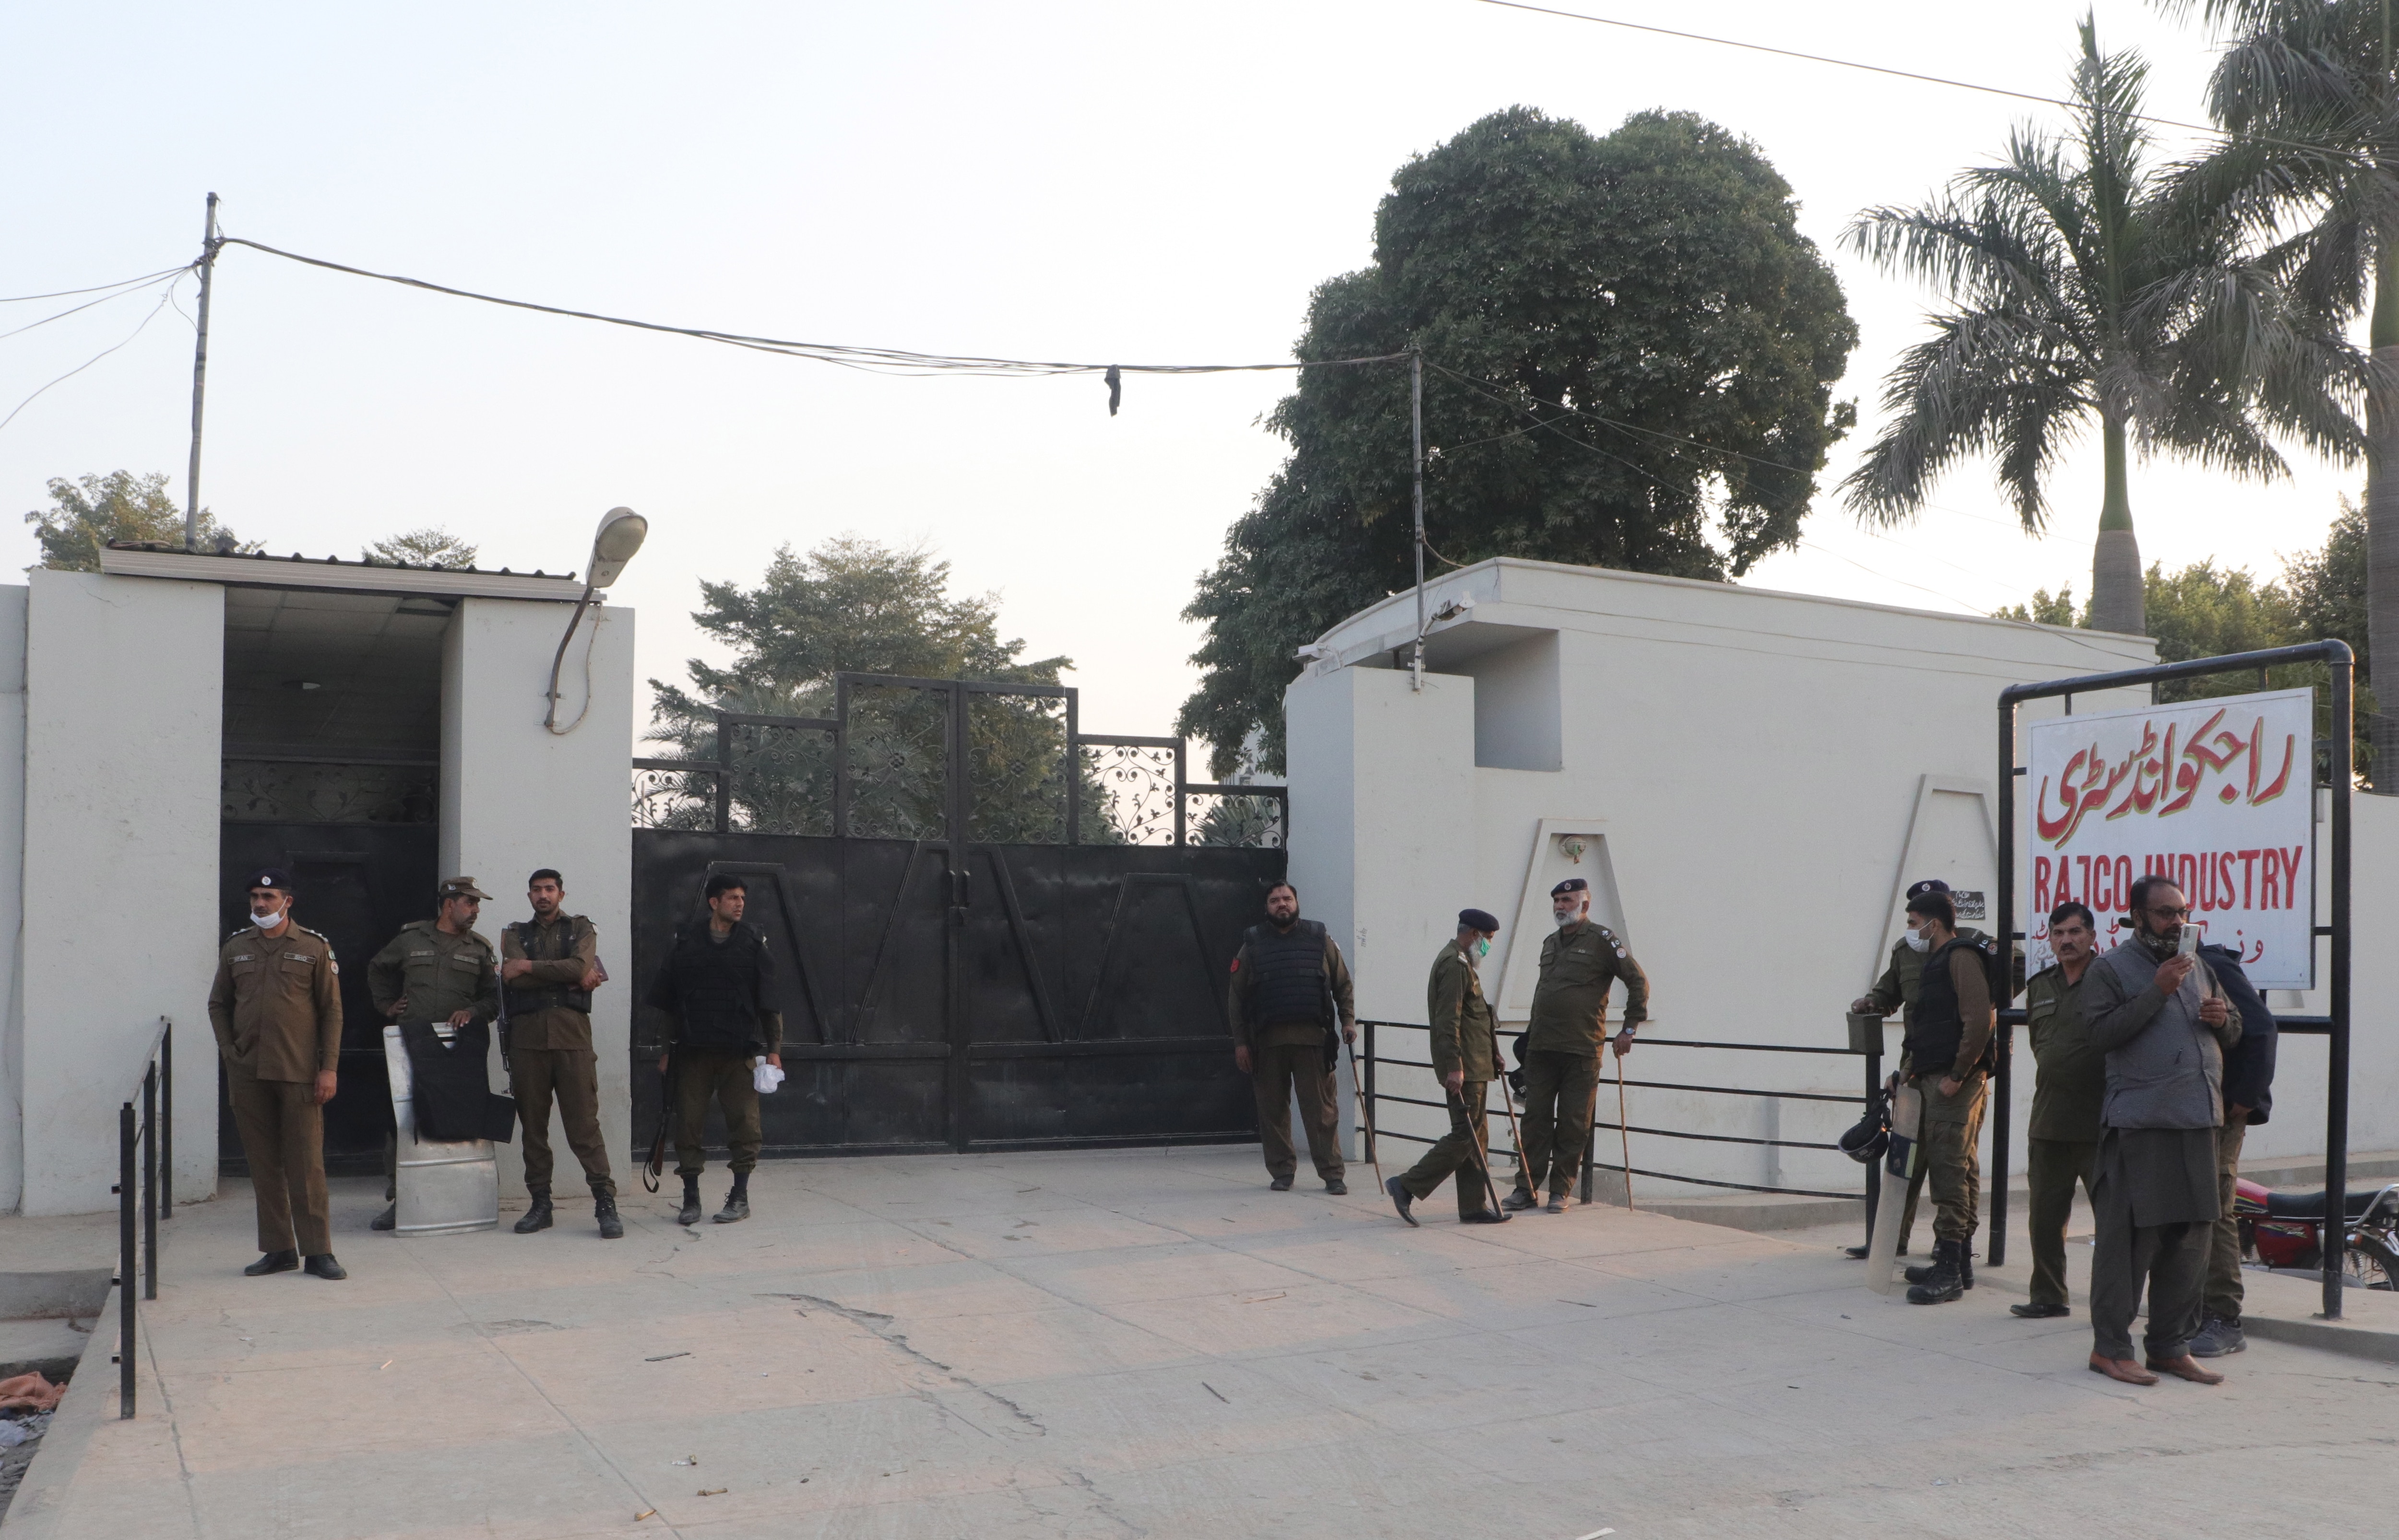 Pakistani security officials stand guard outside the factory where the lynching occurred